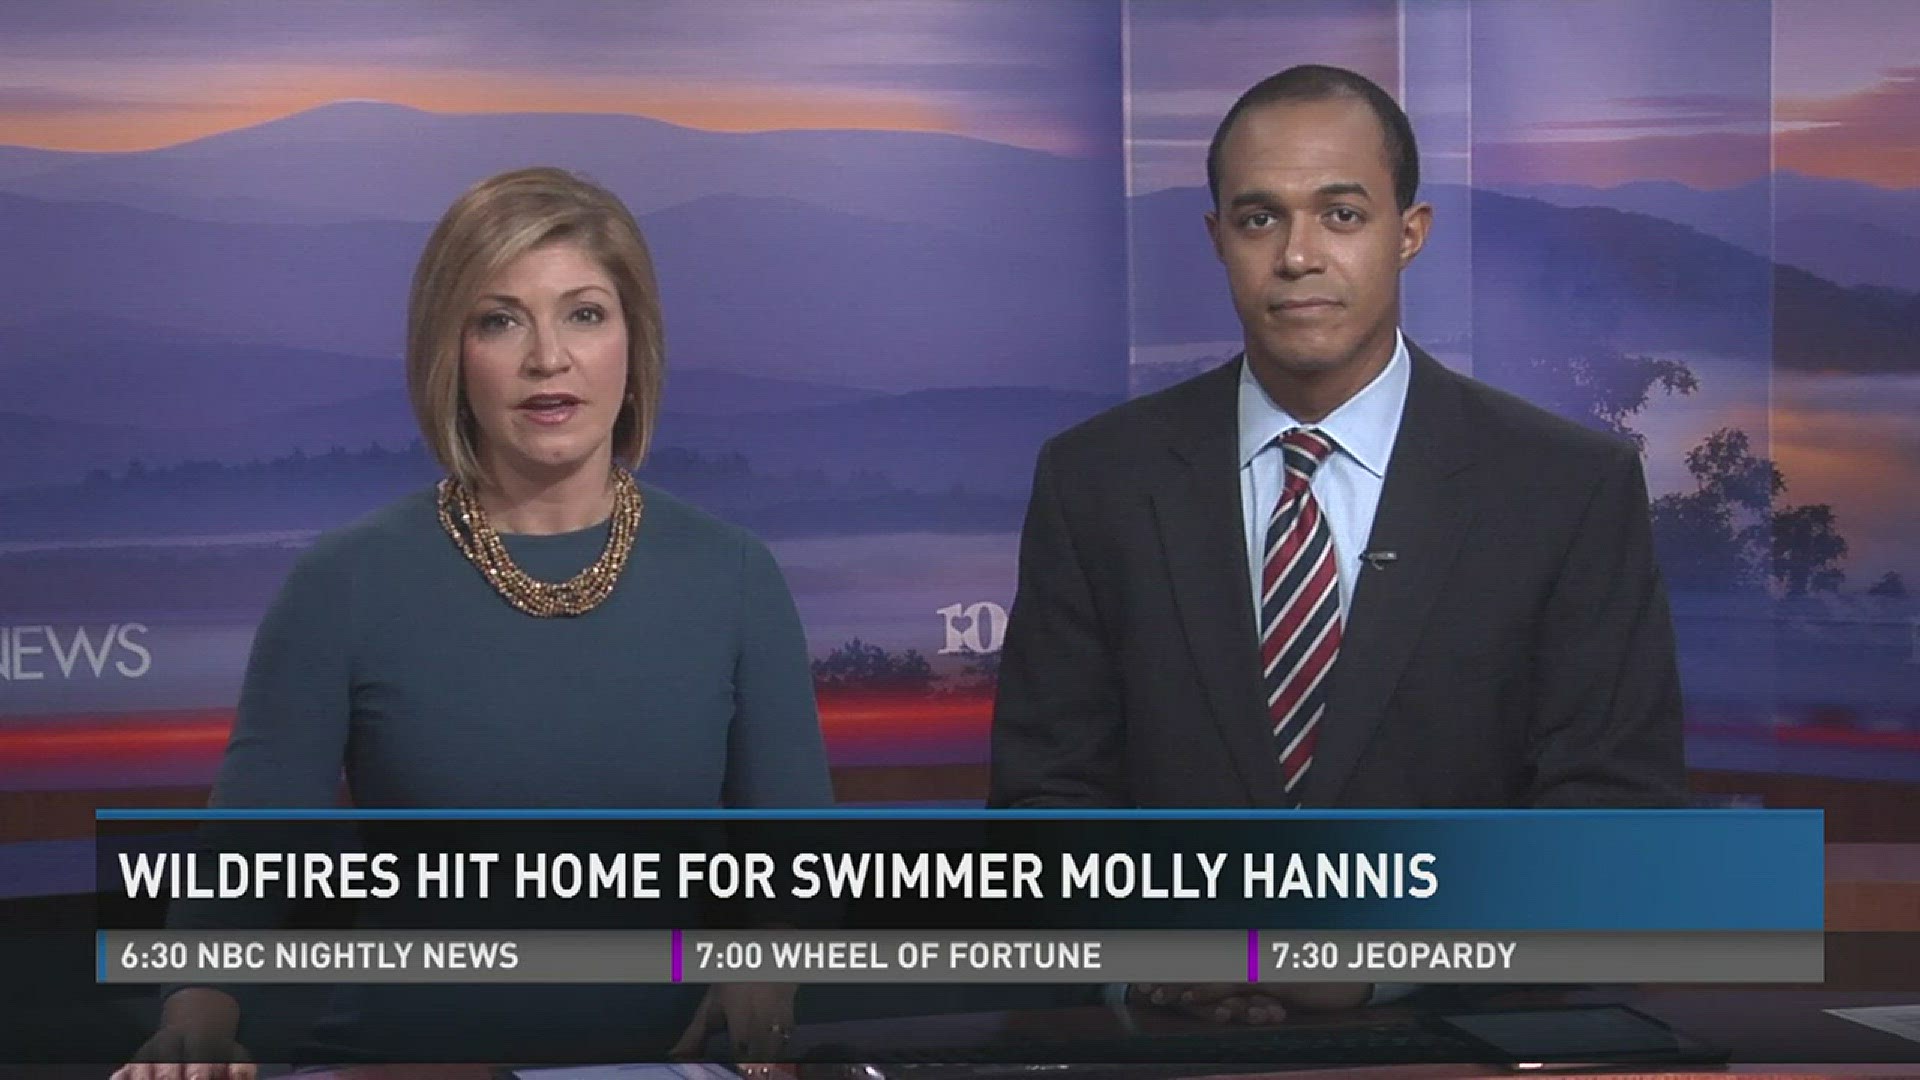 Oct. 17, 2017: California's devastating wildfires hit home for Molly Hannis, a former UT swimmer, Olympian, and current member of the U.S. National Team.